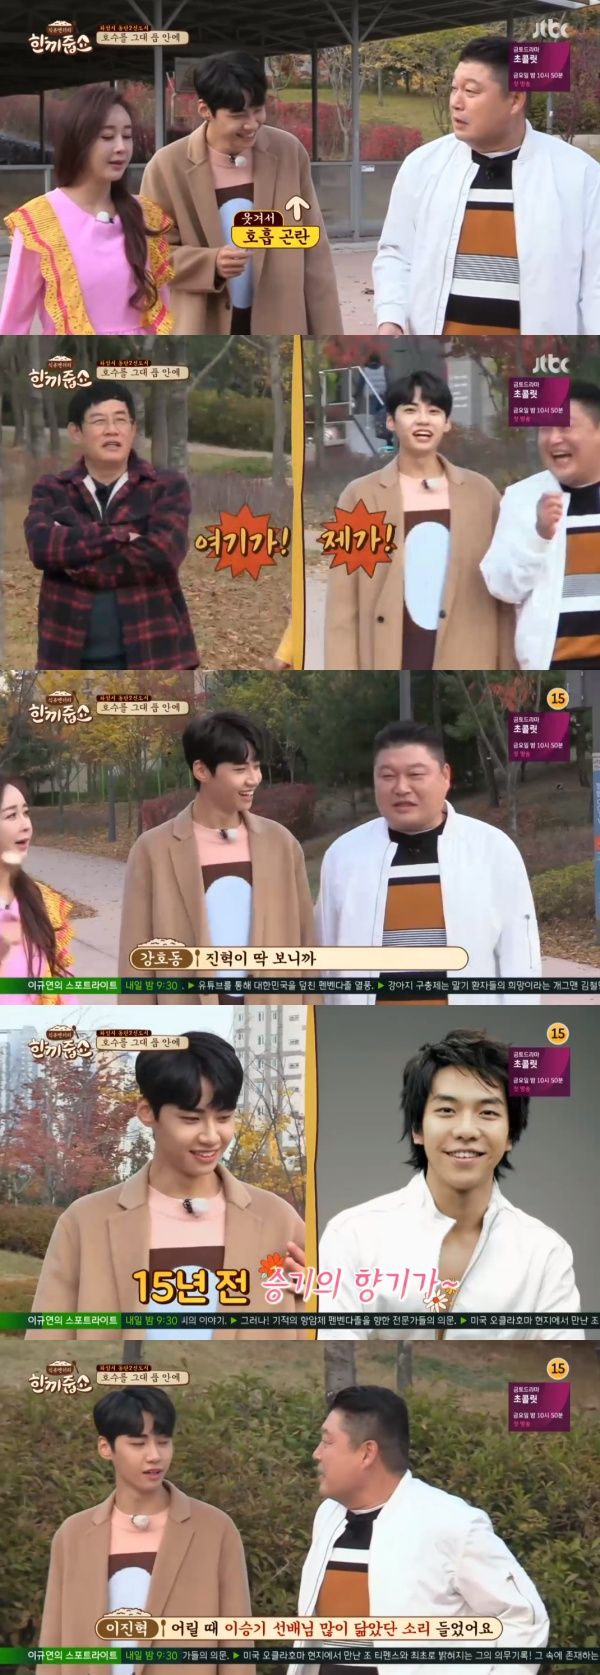 Lets Eat Dinner Together Kang Ho-dong recalled Lee Seung-gis past by watching Lee Jin-hyuk.On the 27th, Crime Chief JTBC entertainment program Lets Eat Dinner Together, So-won Ham and singer Lee Jin-hyuk scrambled to a rice dance and challenged a meal in Dongtan 2 new city in Hwaseong city.Lee Jin-hyuk, who was greedy for the comment from his first appearance, laughed on the day; he stretched, You have to live, you have to do anything.Entertainment is wild, he said, leaving Lee Kyung-kyu freaked out.Lee Kyung-kyu looked at Lee Jin-hyuk and said, After So-won Ham, he has a lot of words.Lee Jin-hyuk, on the other hand, was a good fan of Kang Ho-dong.Kang Ho-dong said, When I look at Jinhyuk, I remember the first time I met Lee Seung-gi 15 years ago.Lee Jin-hyuk said, When I was a child, I heard a lot of likeness to Lee Seung-gi.Lee Kyung-kyu then brought Lee Jin-hyuk to his side seat.So-won Ham said, It is different for people who have been broadcasting for a long time, he said, and I take a person who is easy to broadcast.